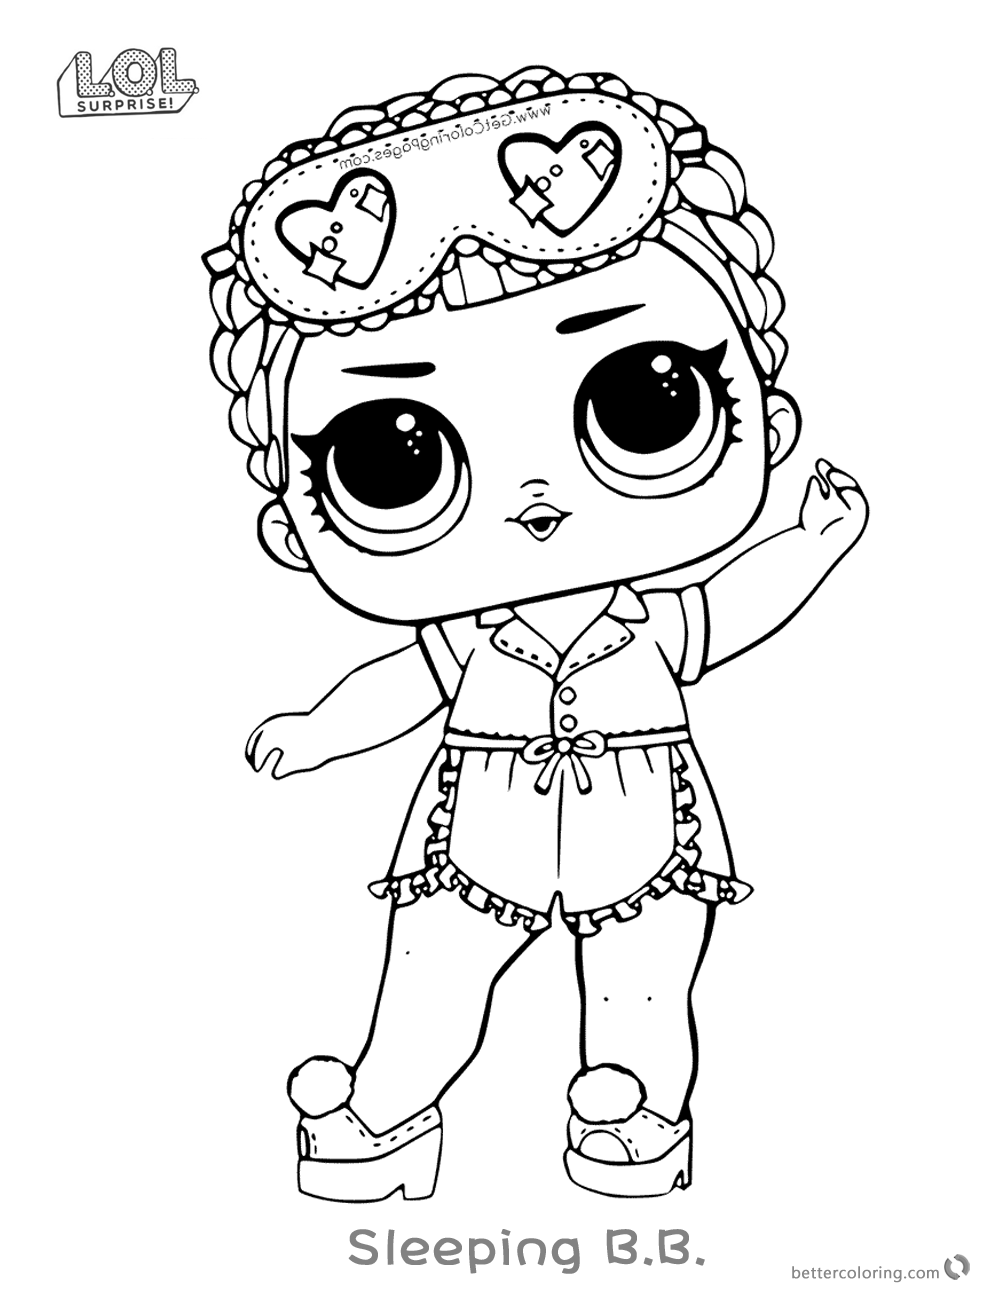 49-coloring-pages-lol-paper-dolls-printable